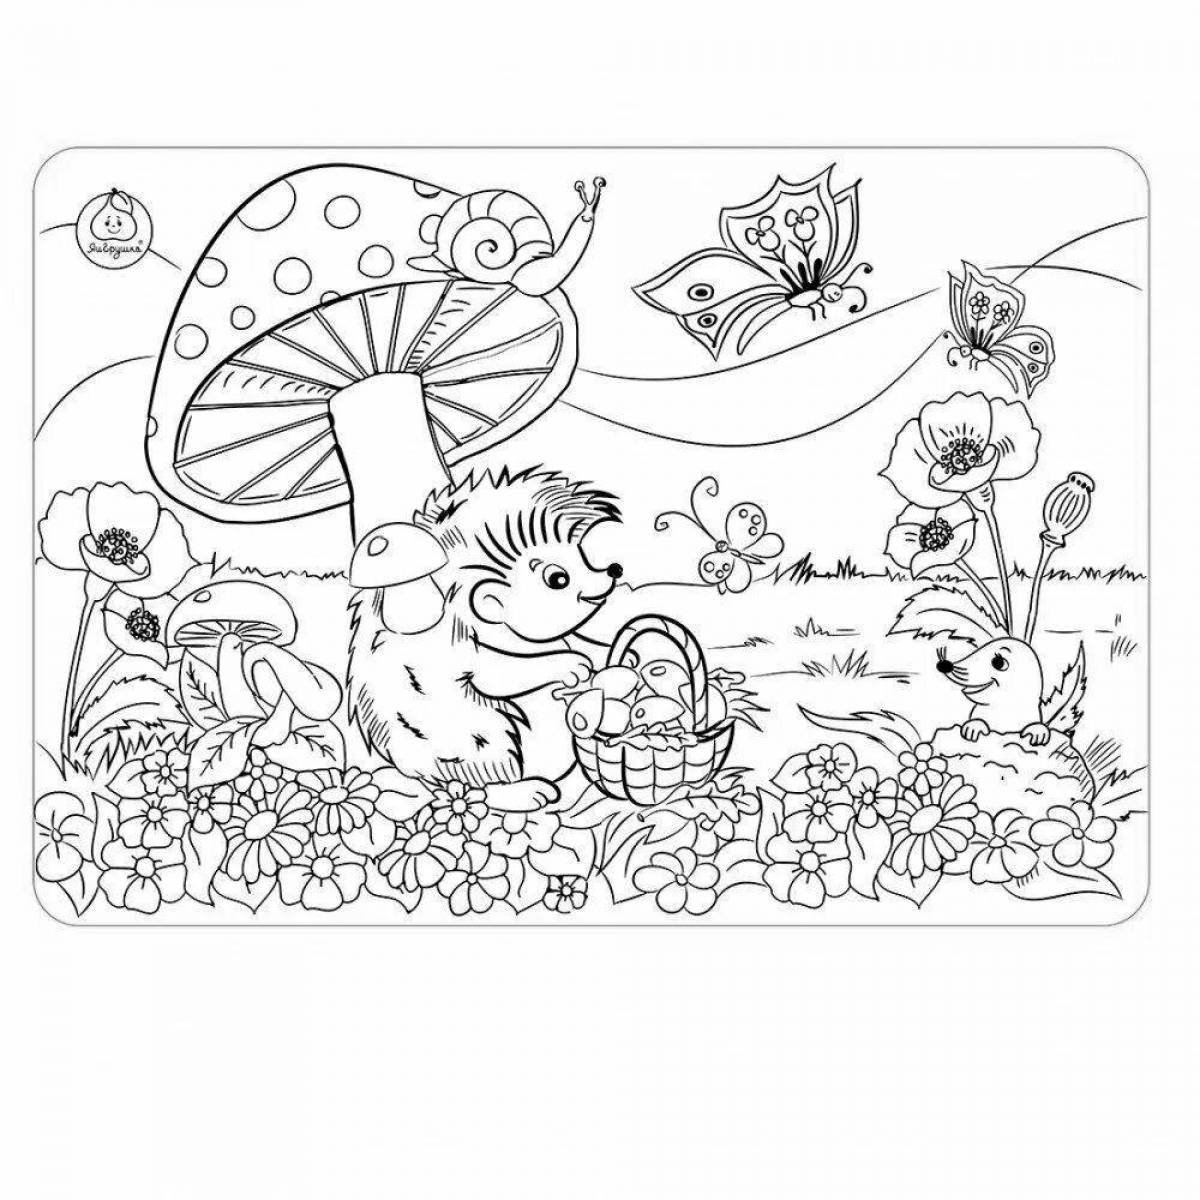 Comforting coloring page floor